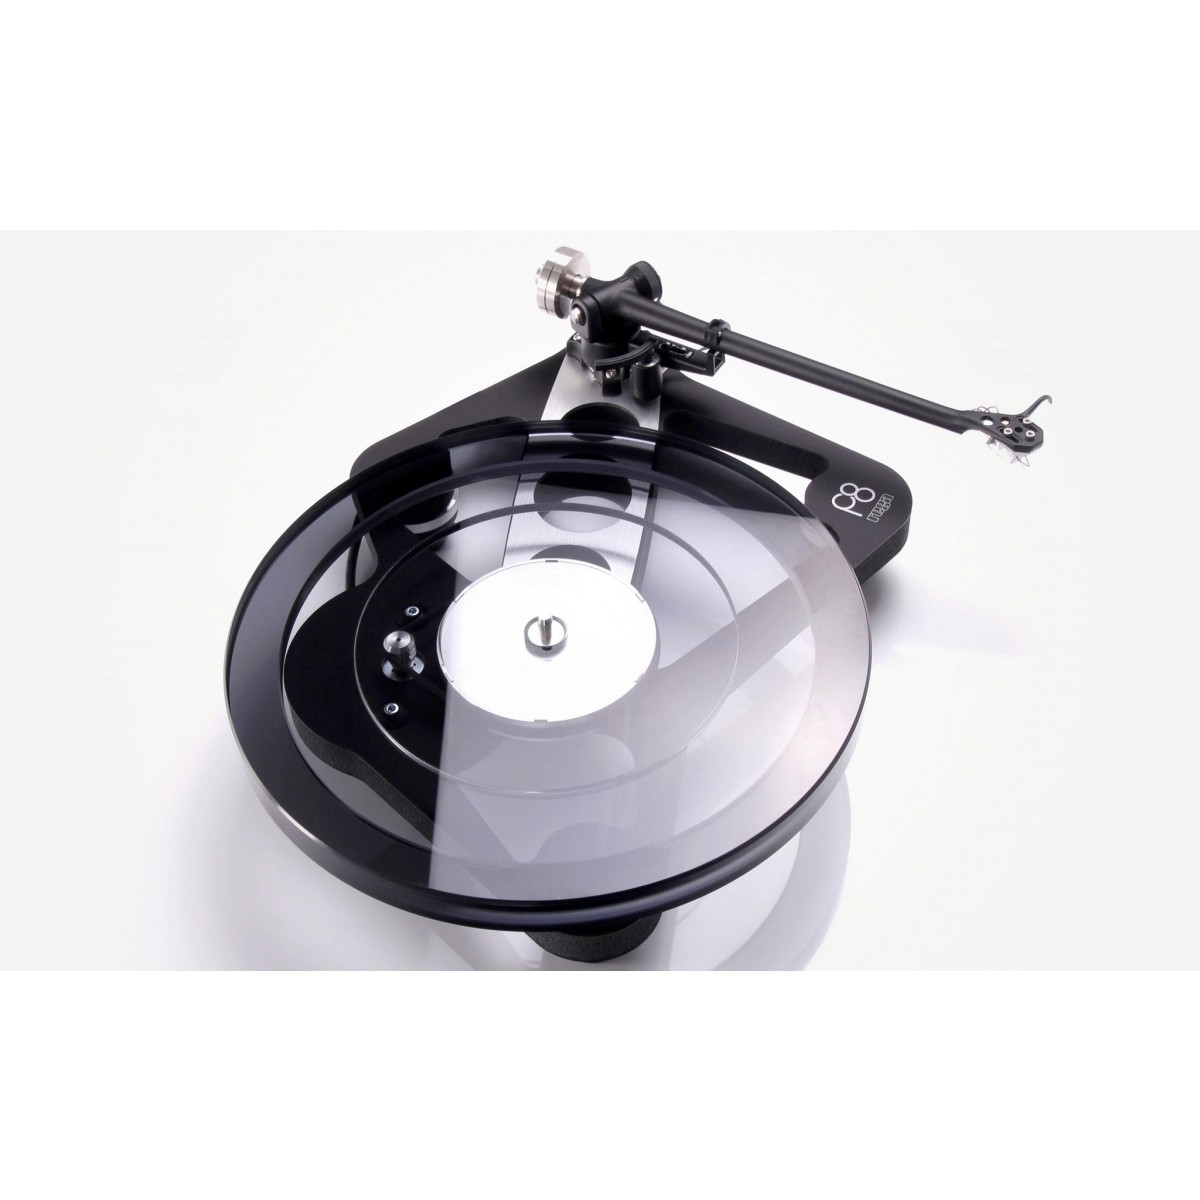 Rega 2X COURROIES REGA PLANAR P1 P2 P3 P5 P6 P8 P25 P78 EXTRA FORT NEUF TOURNE DISQUE 